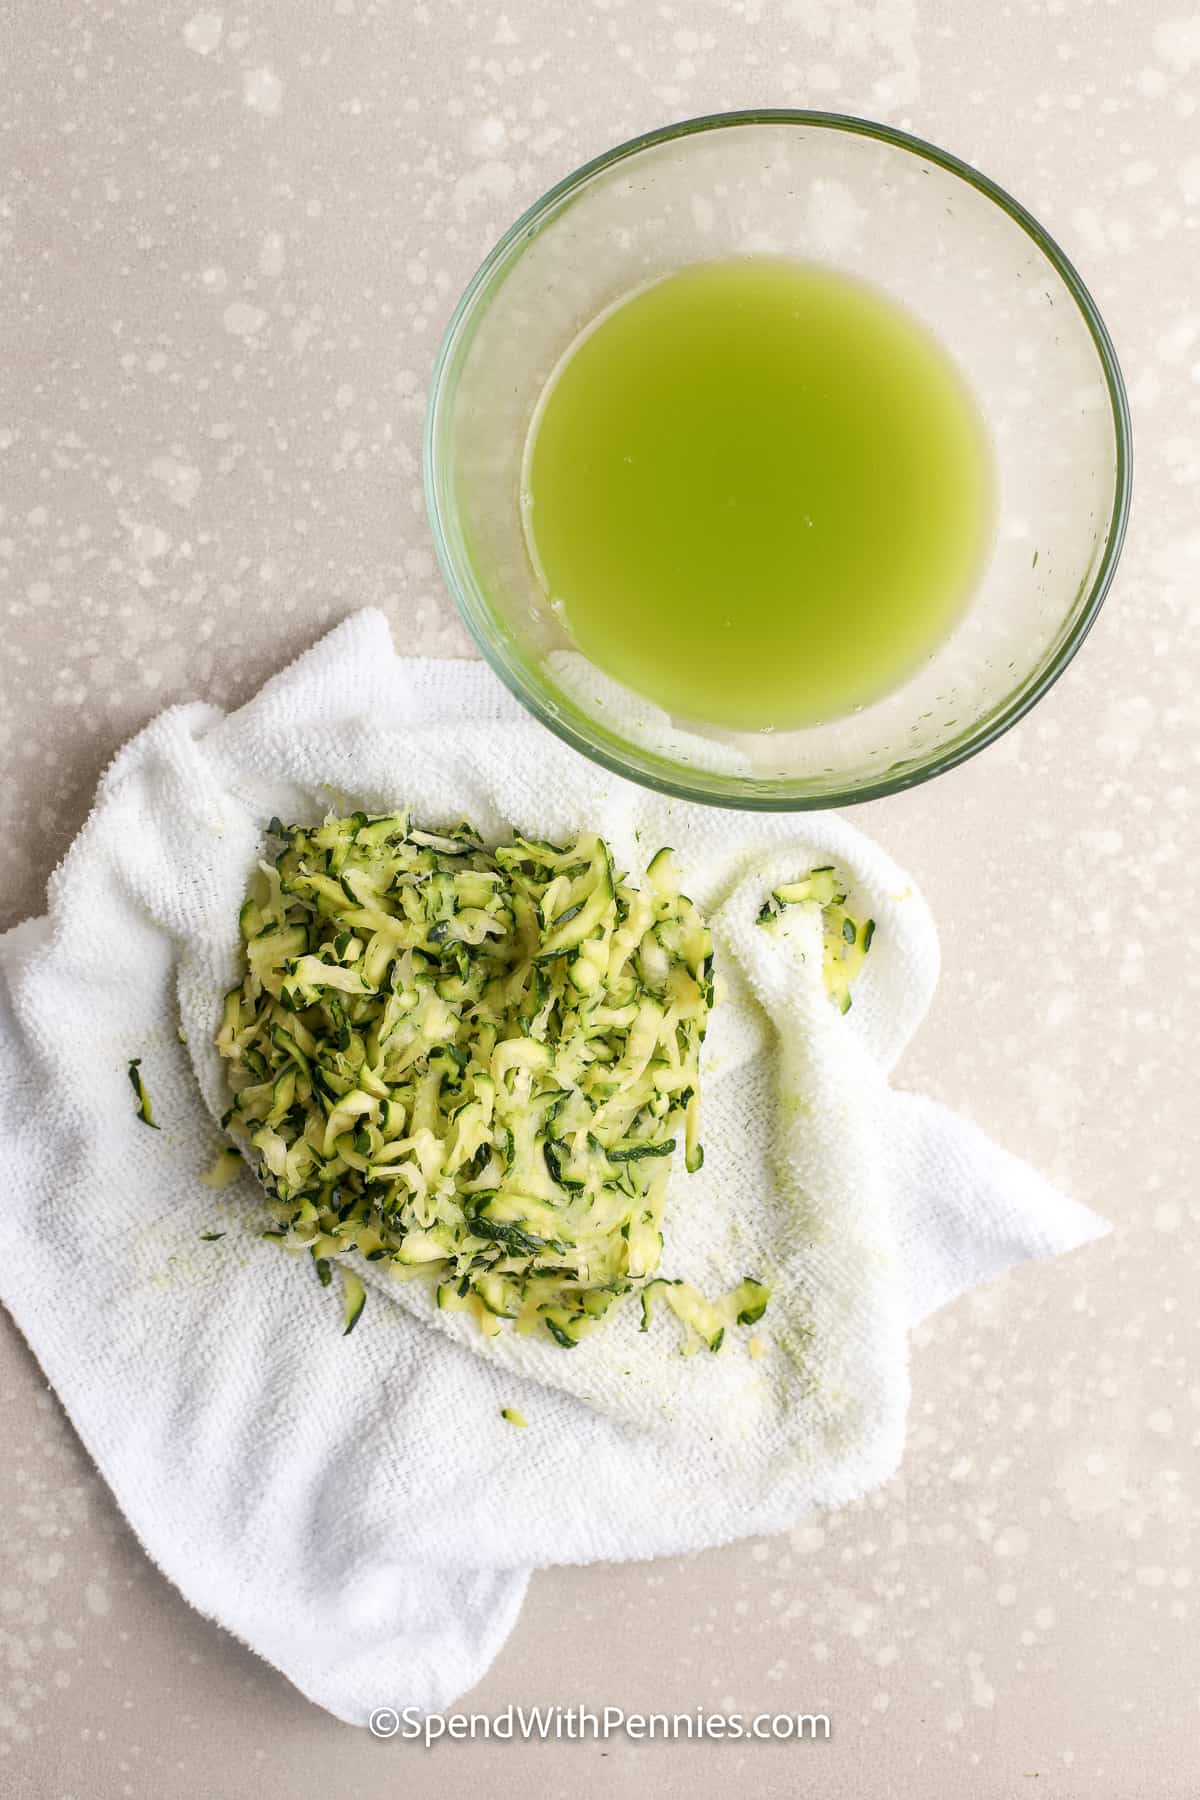 shredded zucchini on a cloth with a bowl of green liquid next to it